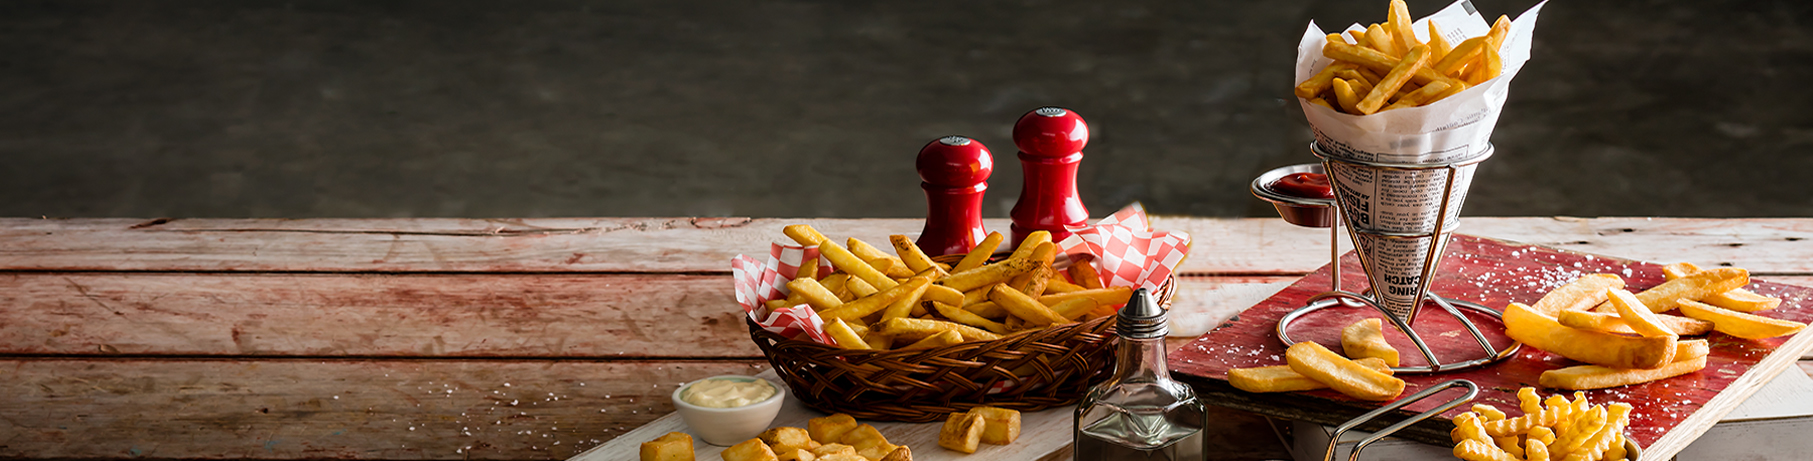 Selection of McCain Foods French fries, fries and chip on table